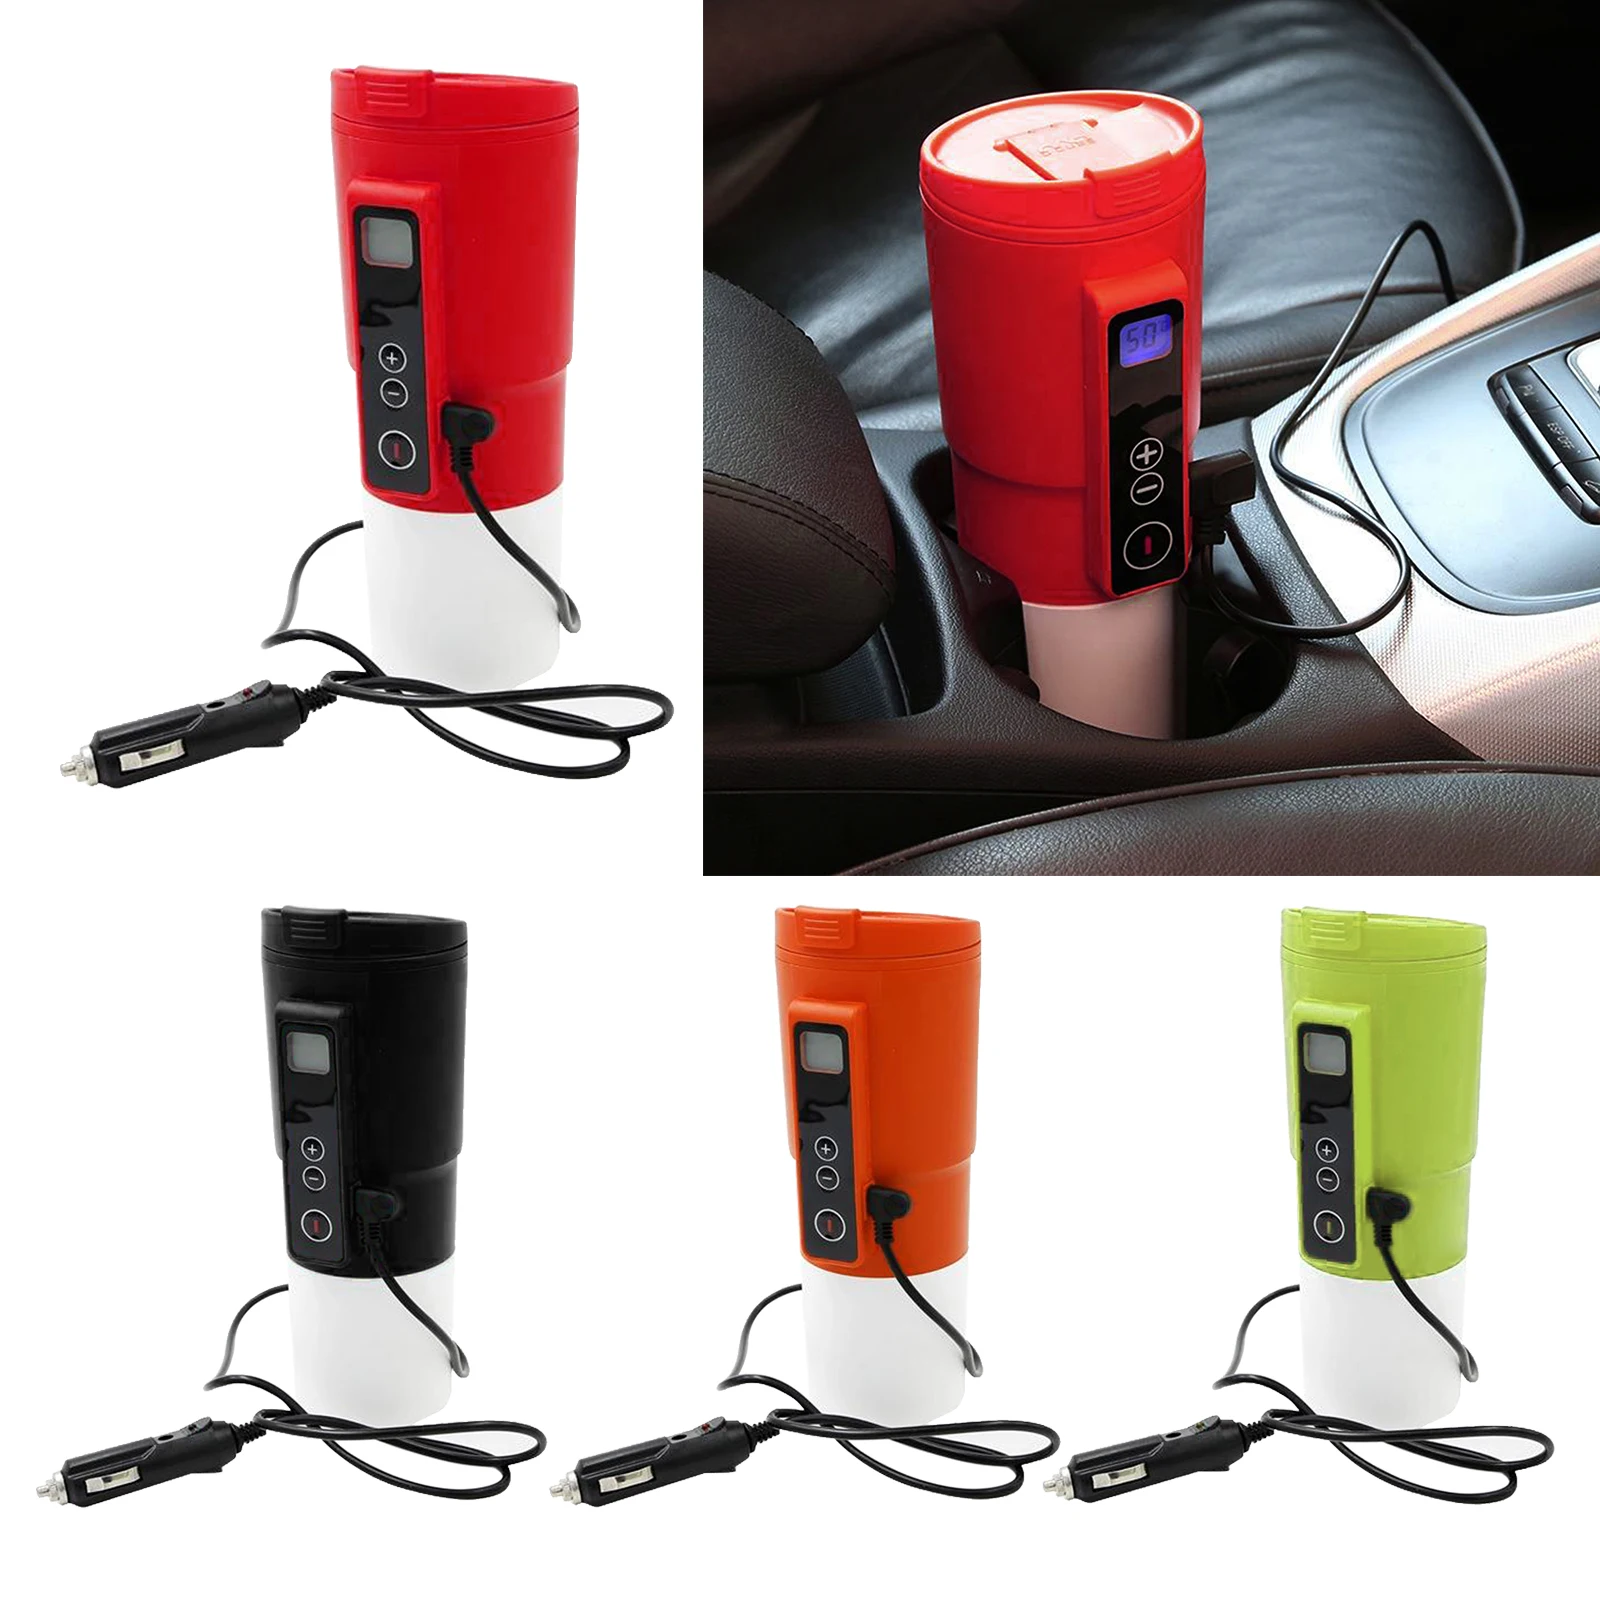 500ml 12V Smart Auto Electric Heating Travel Coffee Mug for Car Temperature Control LCD Display Easily Washing